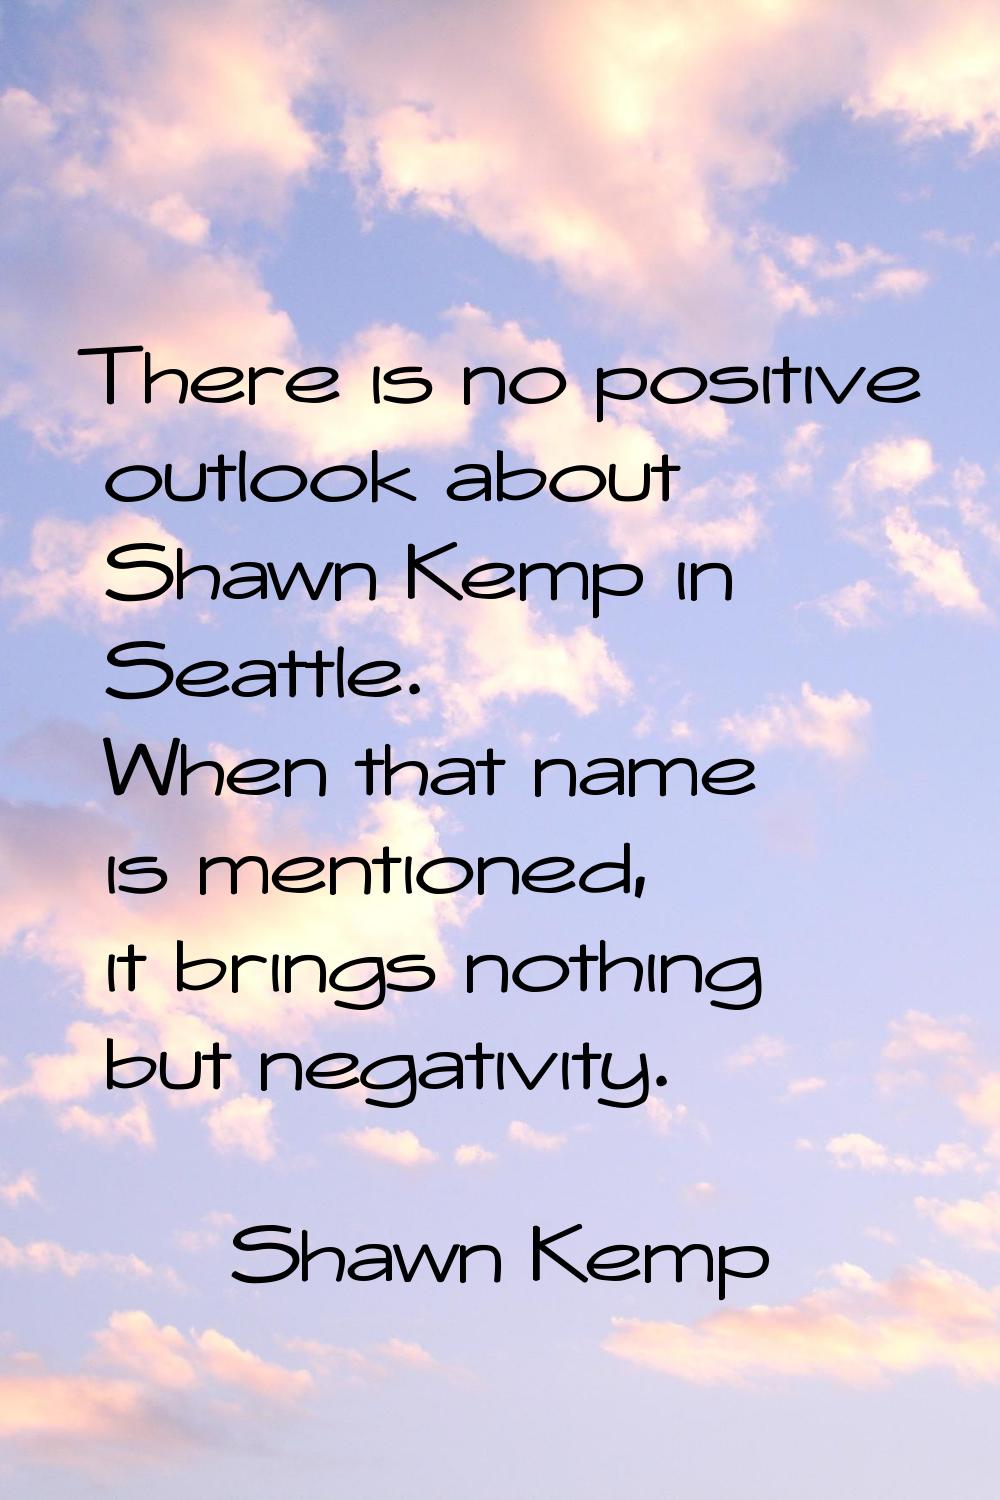 There is no positive outlook about Shawn Kemp in Seattle. When that name is mentioned, it brings no